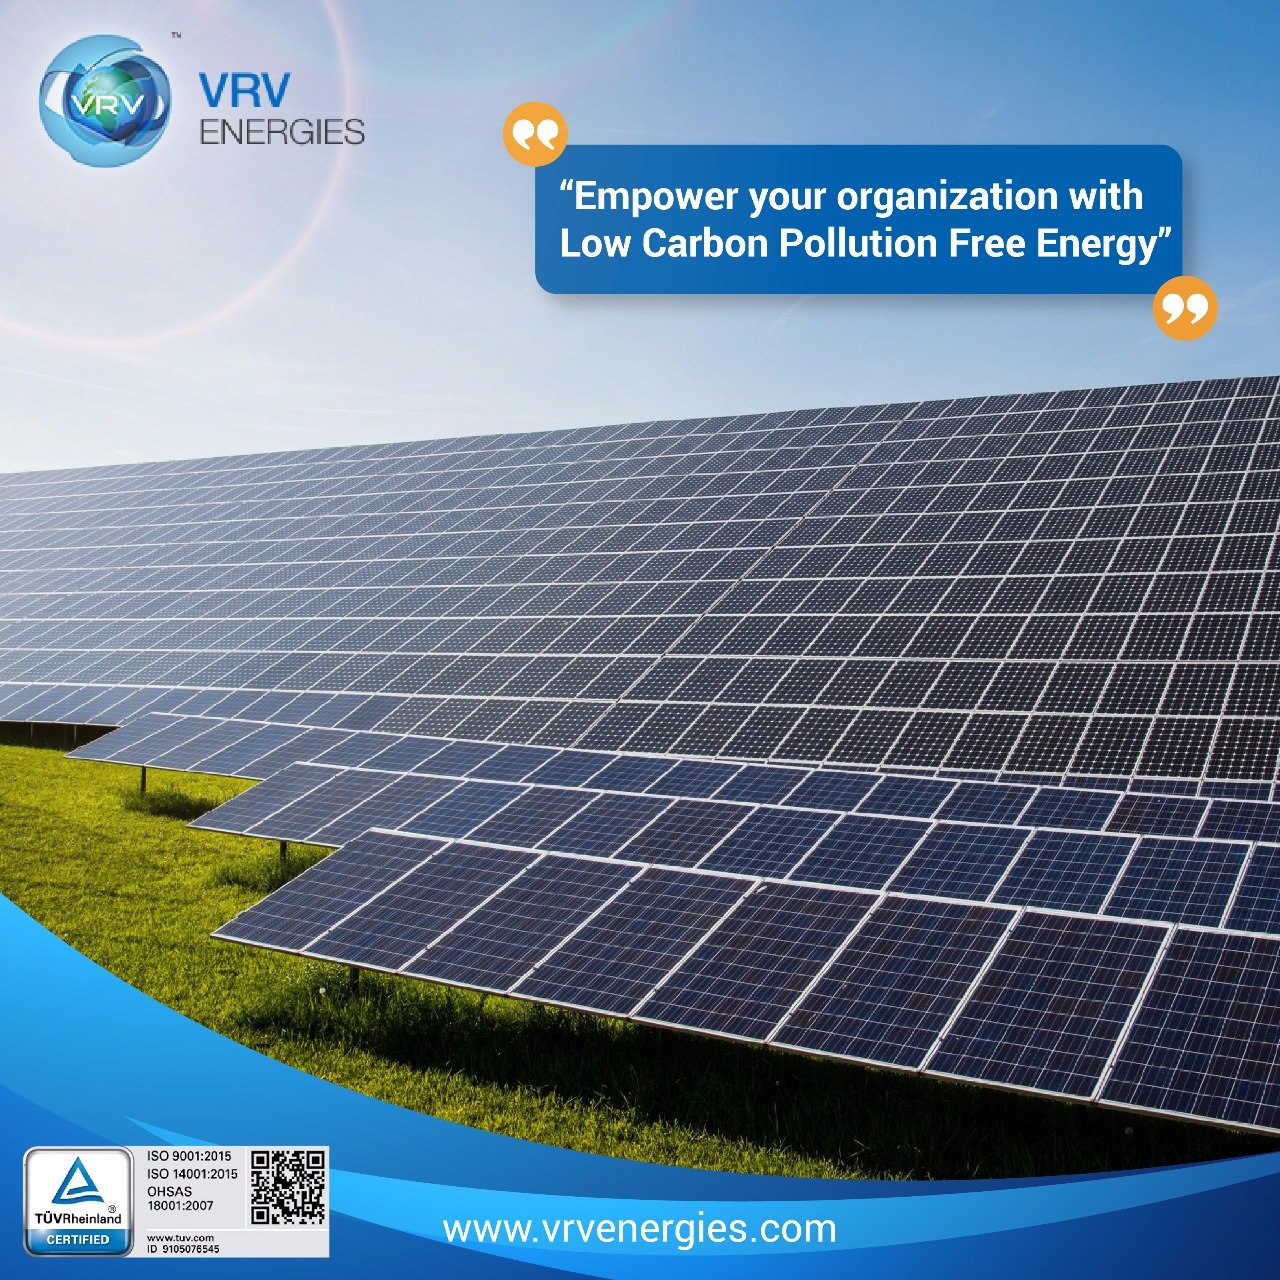 Manufacturer of Solar PV Modules and Systems